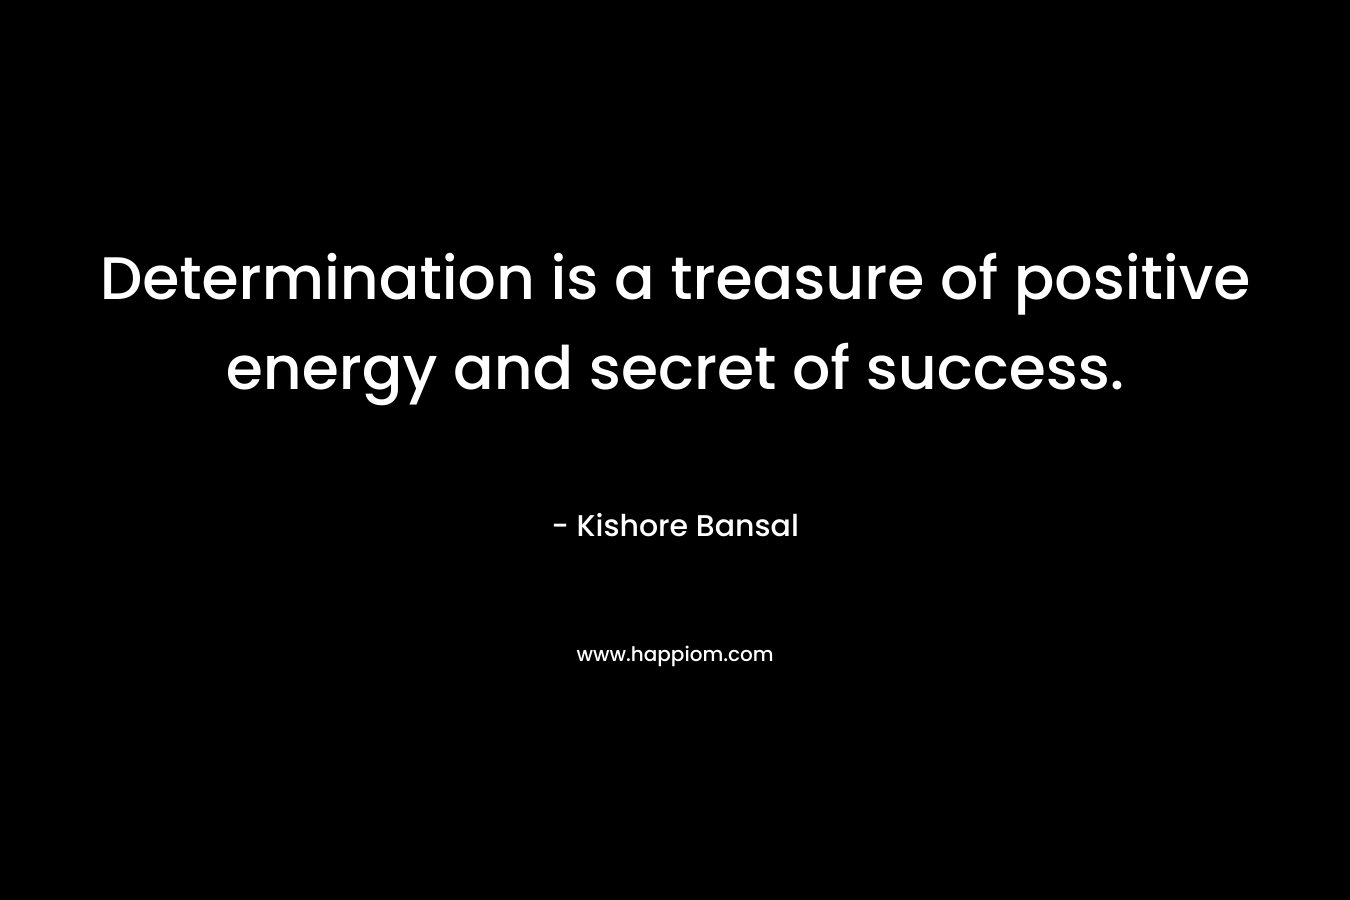 Determination is a treasure of positive energy and secret of success.